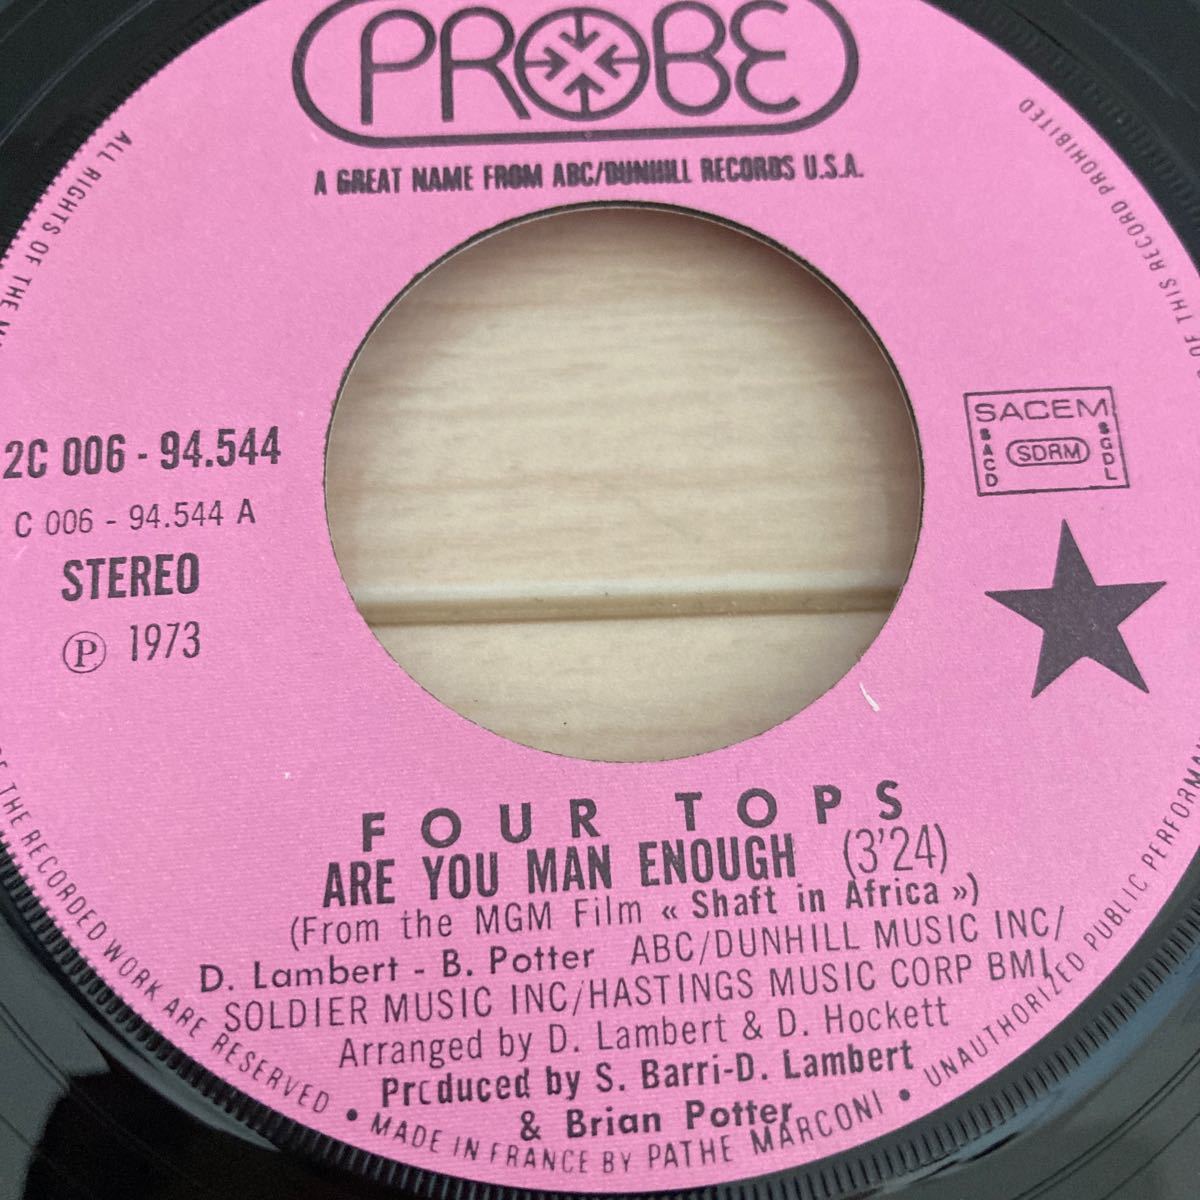 Are you man enough / Shaft in Africa/ sound track/ Four Tops / O.S.T. / フランス盤 / original/ Muro / Dev Large/ Soul / Funkの画像4